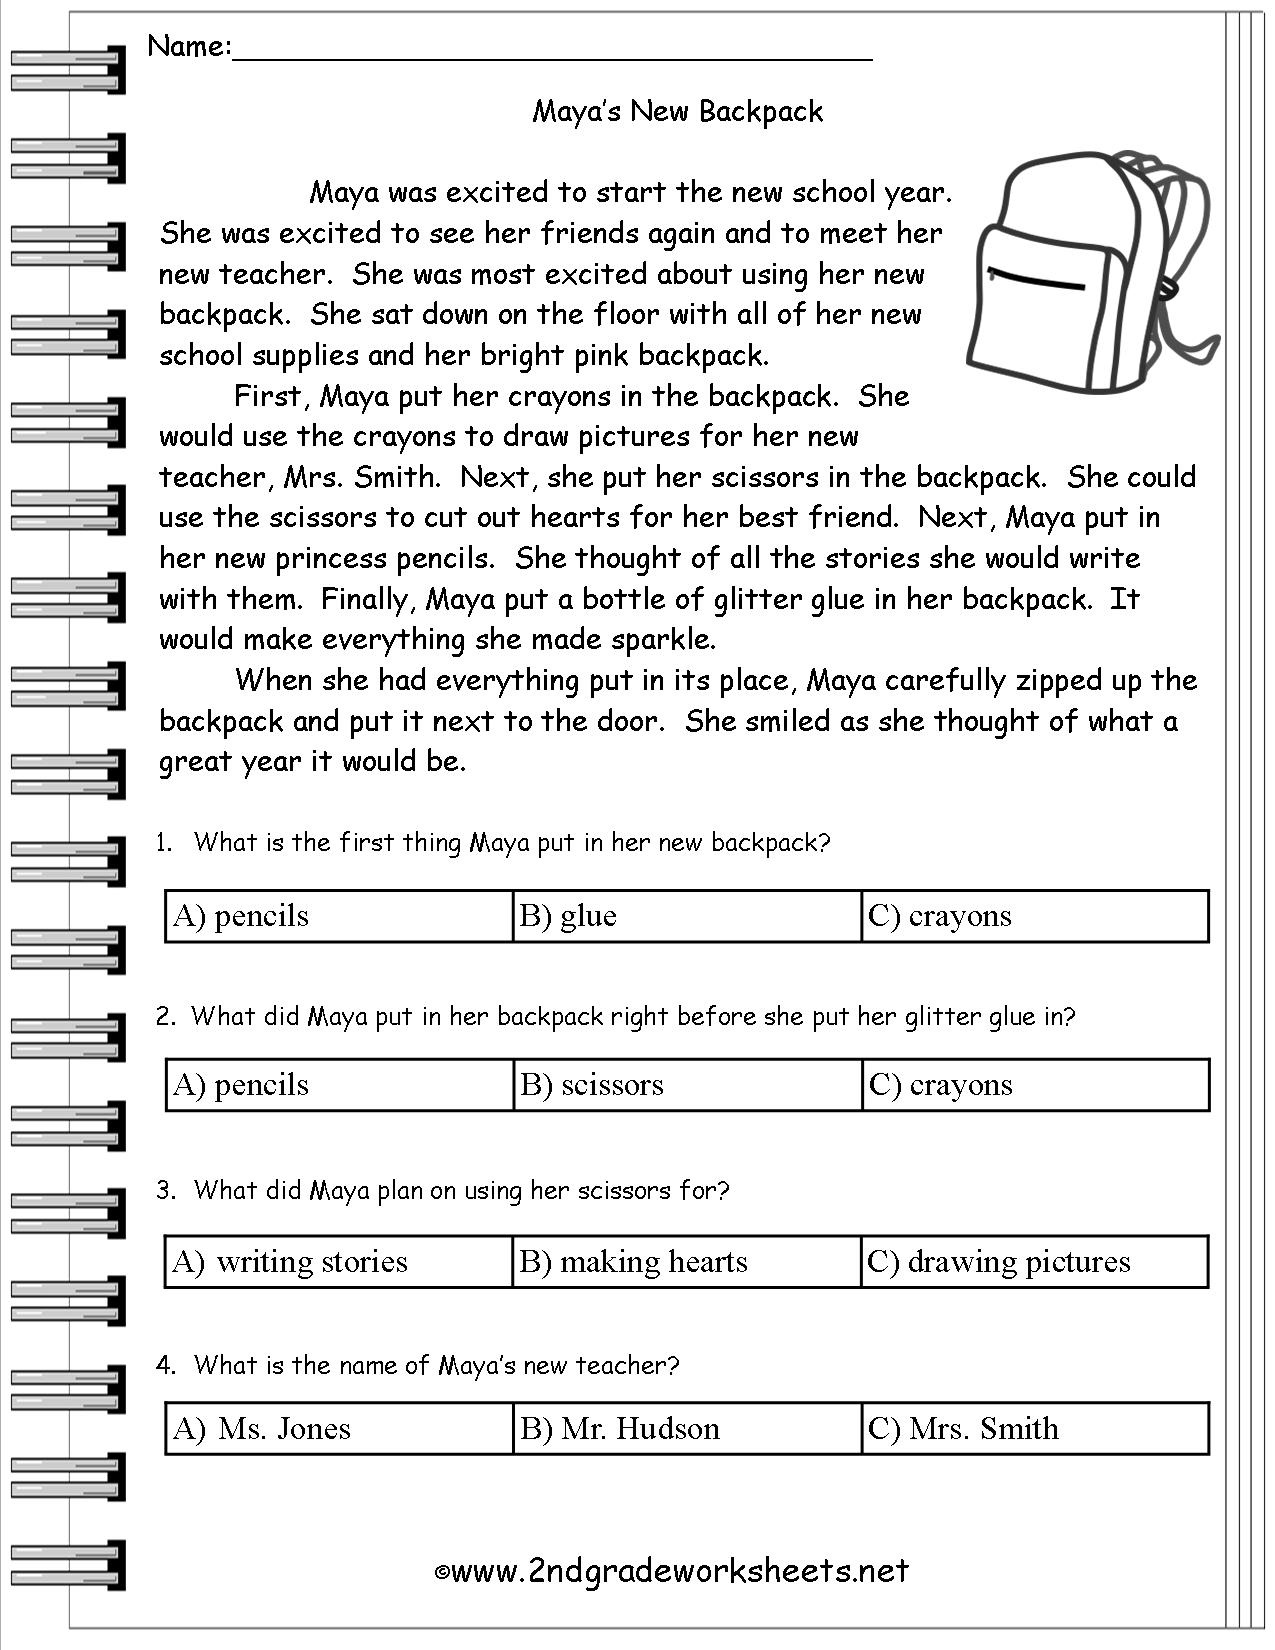 printable-english-worksheets-for-middle-school-peggy-worksheets